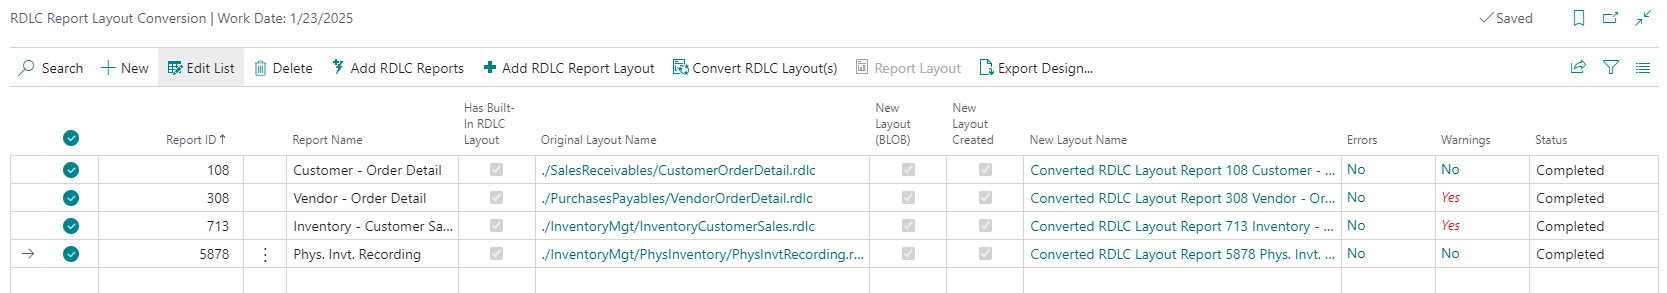 rdlc-report-layout-conversion-completed